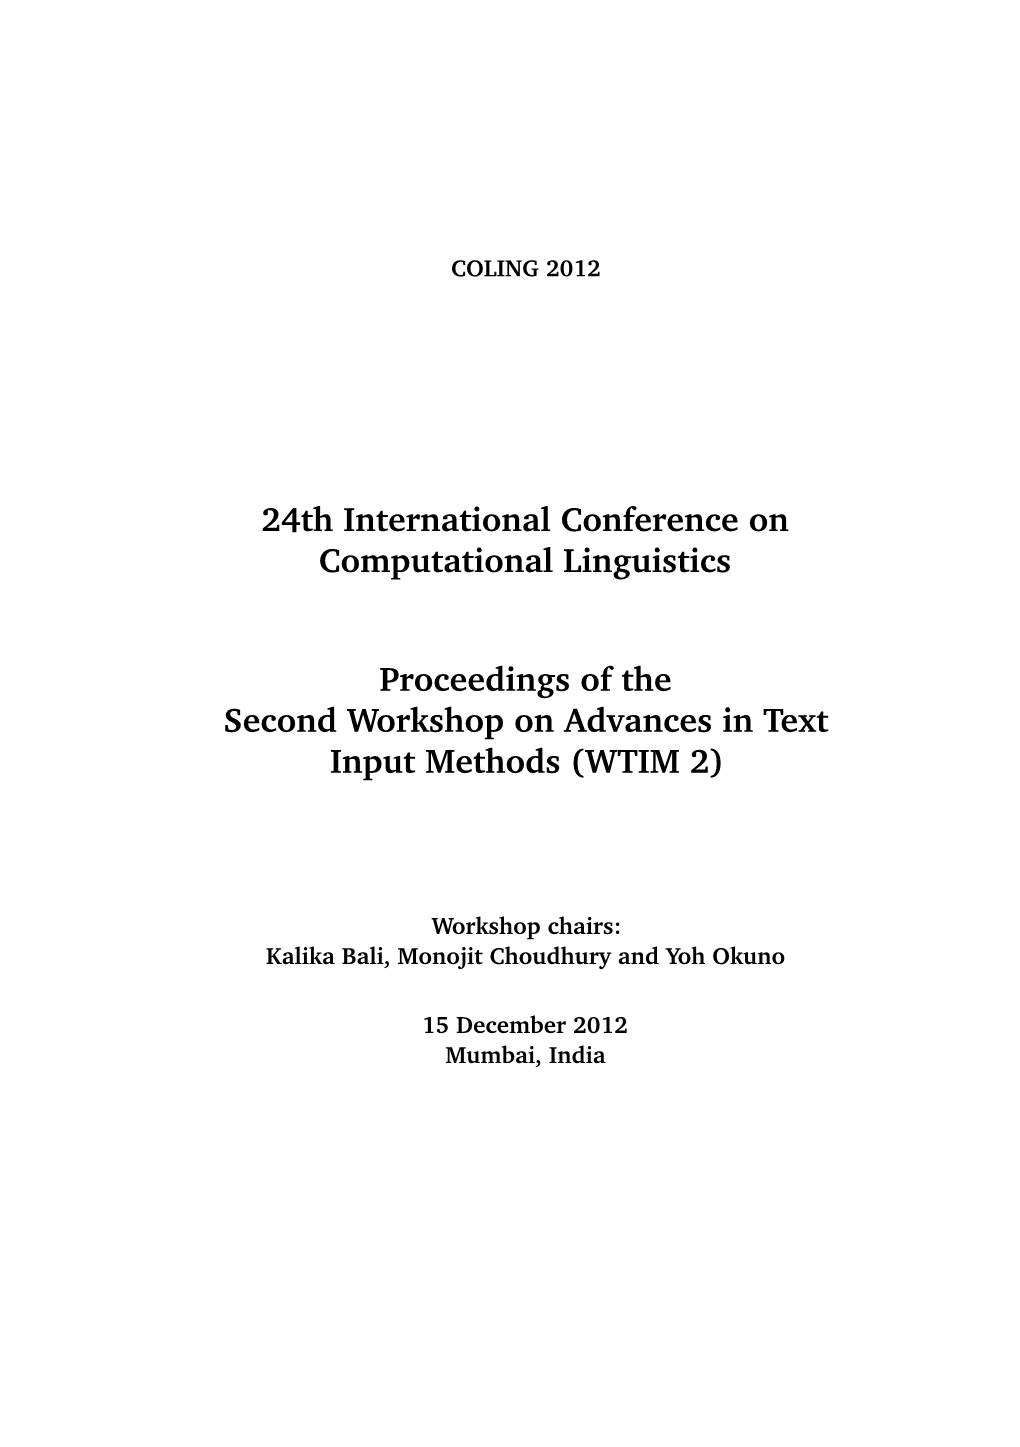 Proceedings of the Second Workshop on Advances in Text Input Methods (WTIM 2)